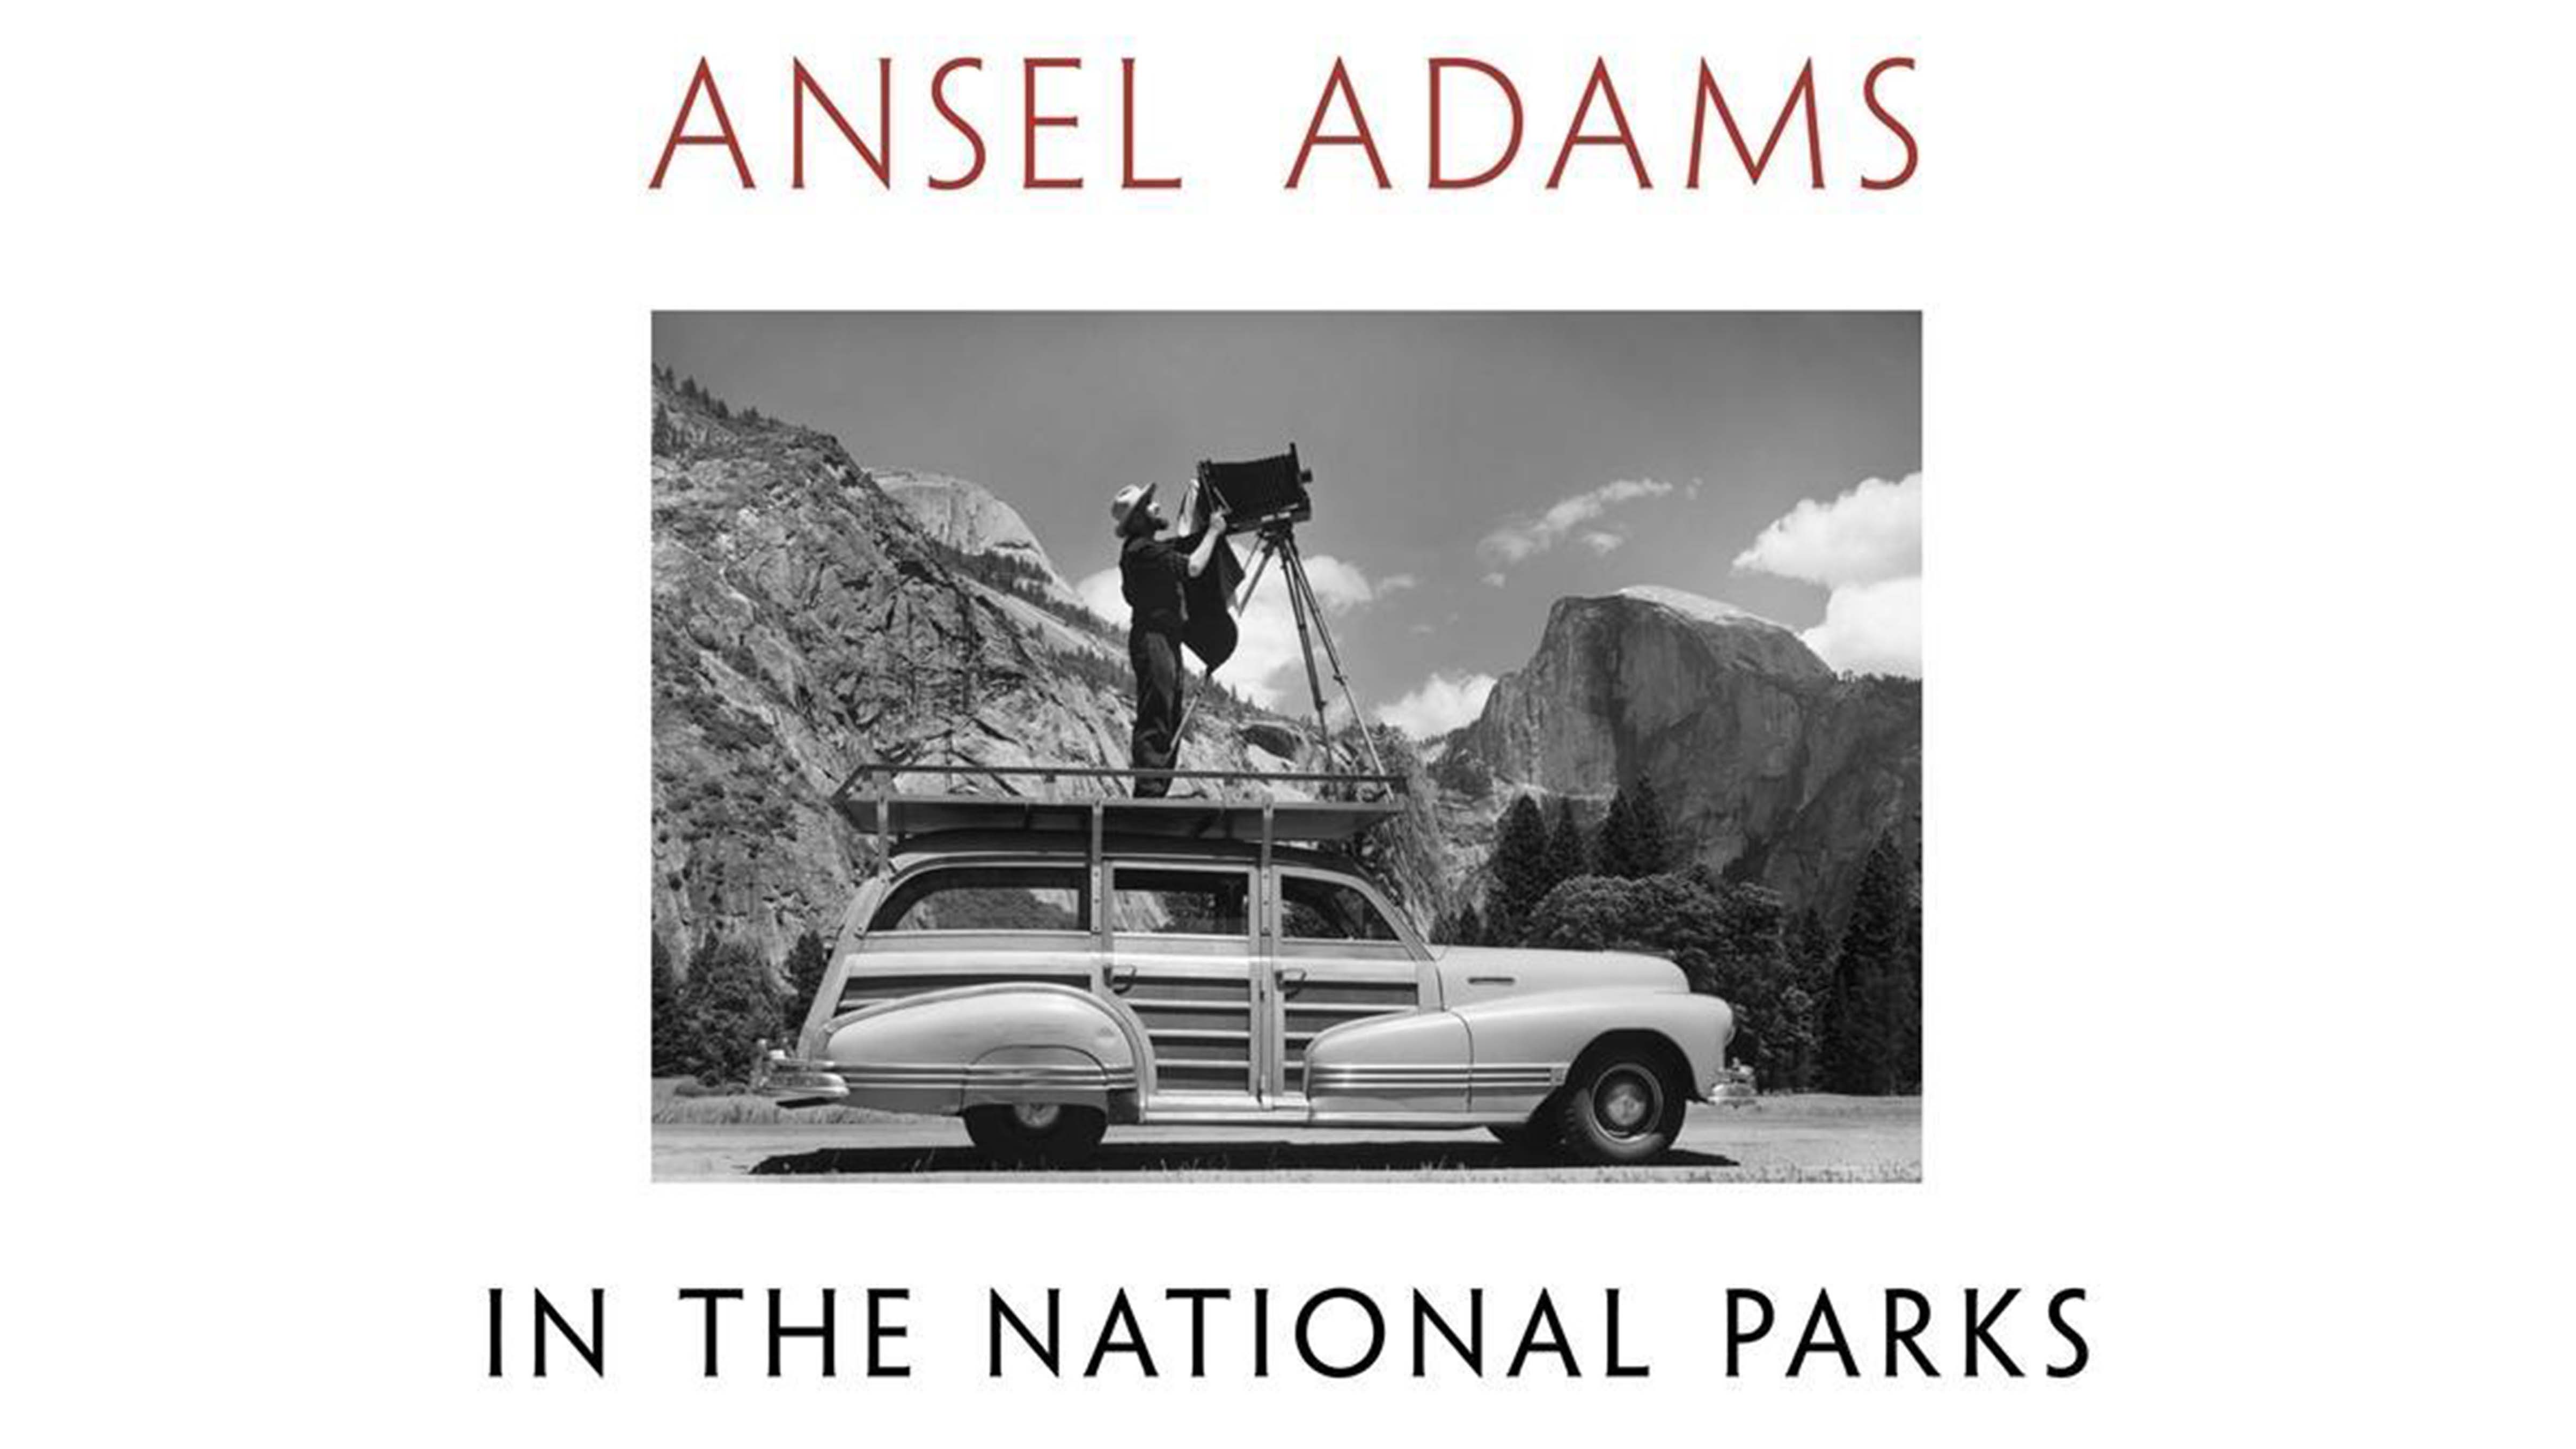 Cover of Ansel Adams in the National Parks, one of the best books on photography